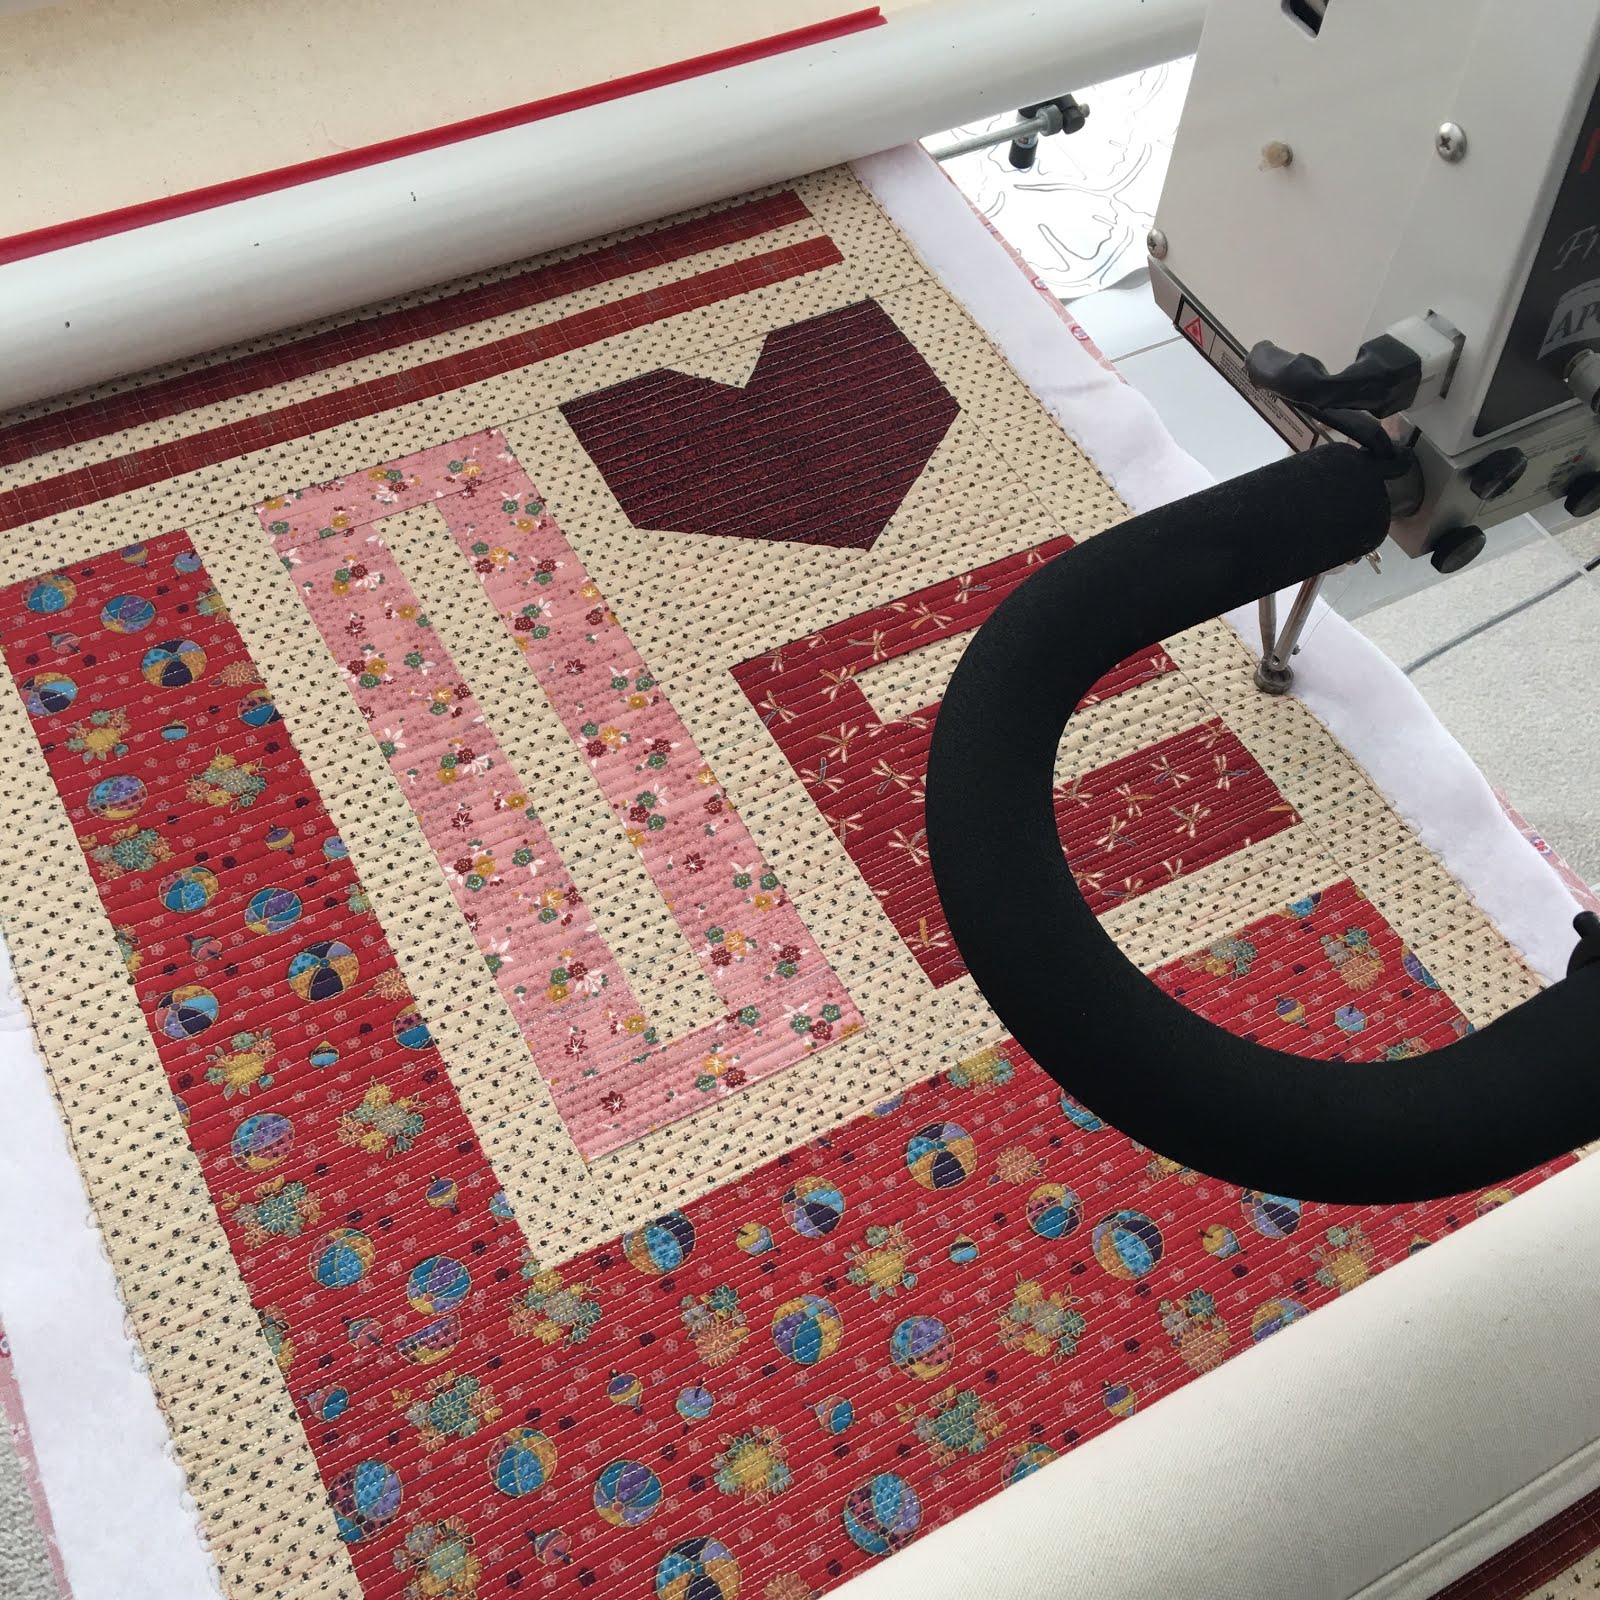 Project Quilting 11.3: Put a Heart on It